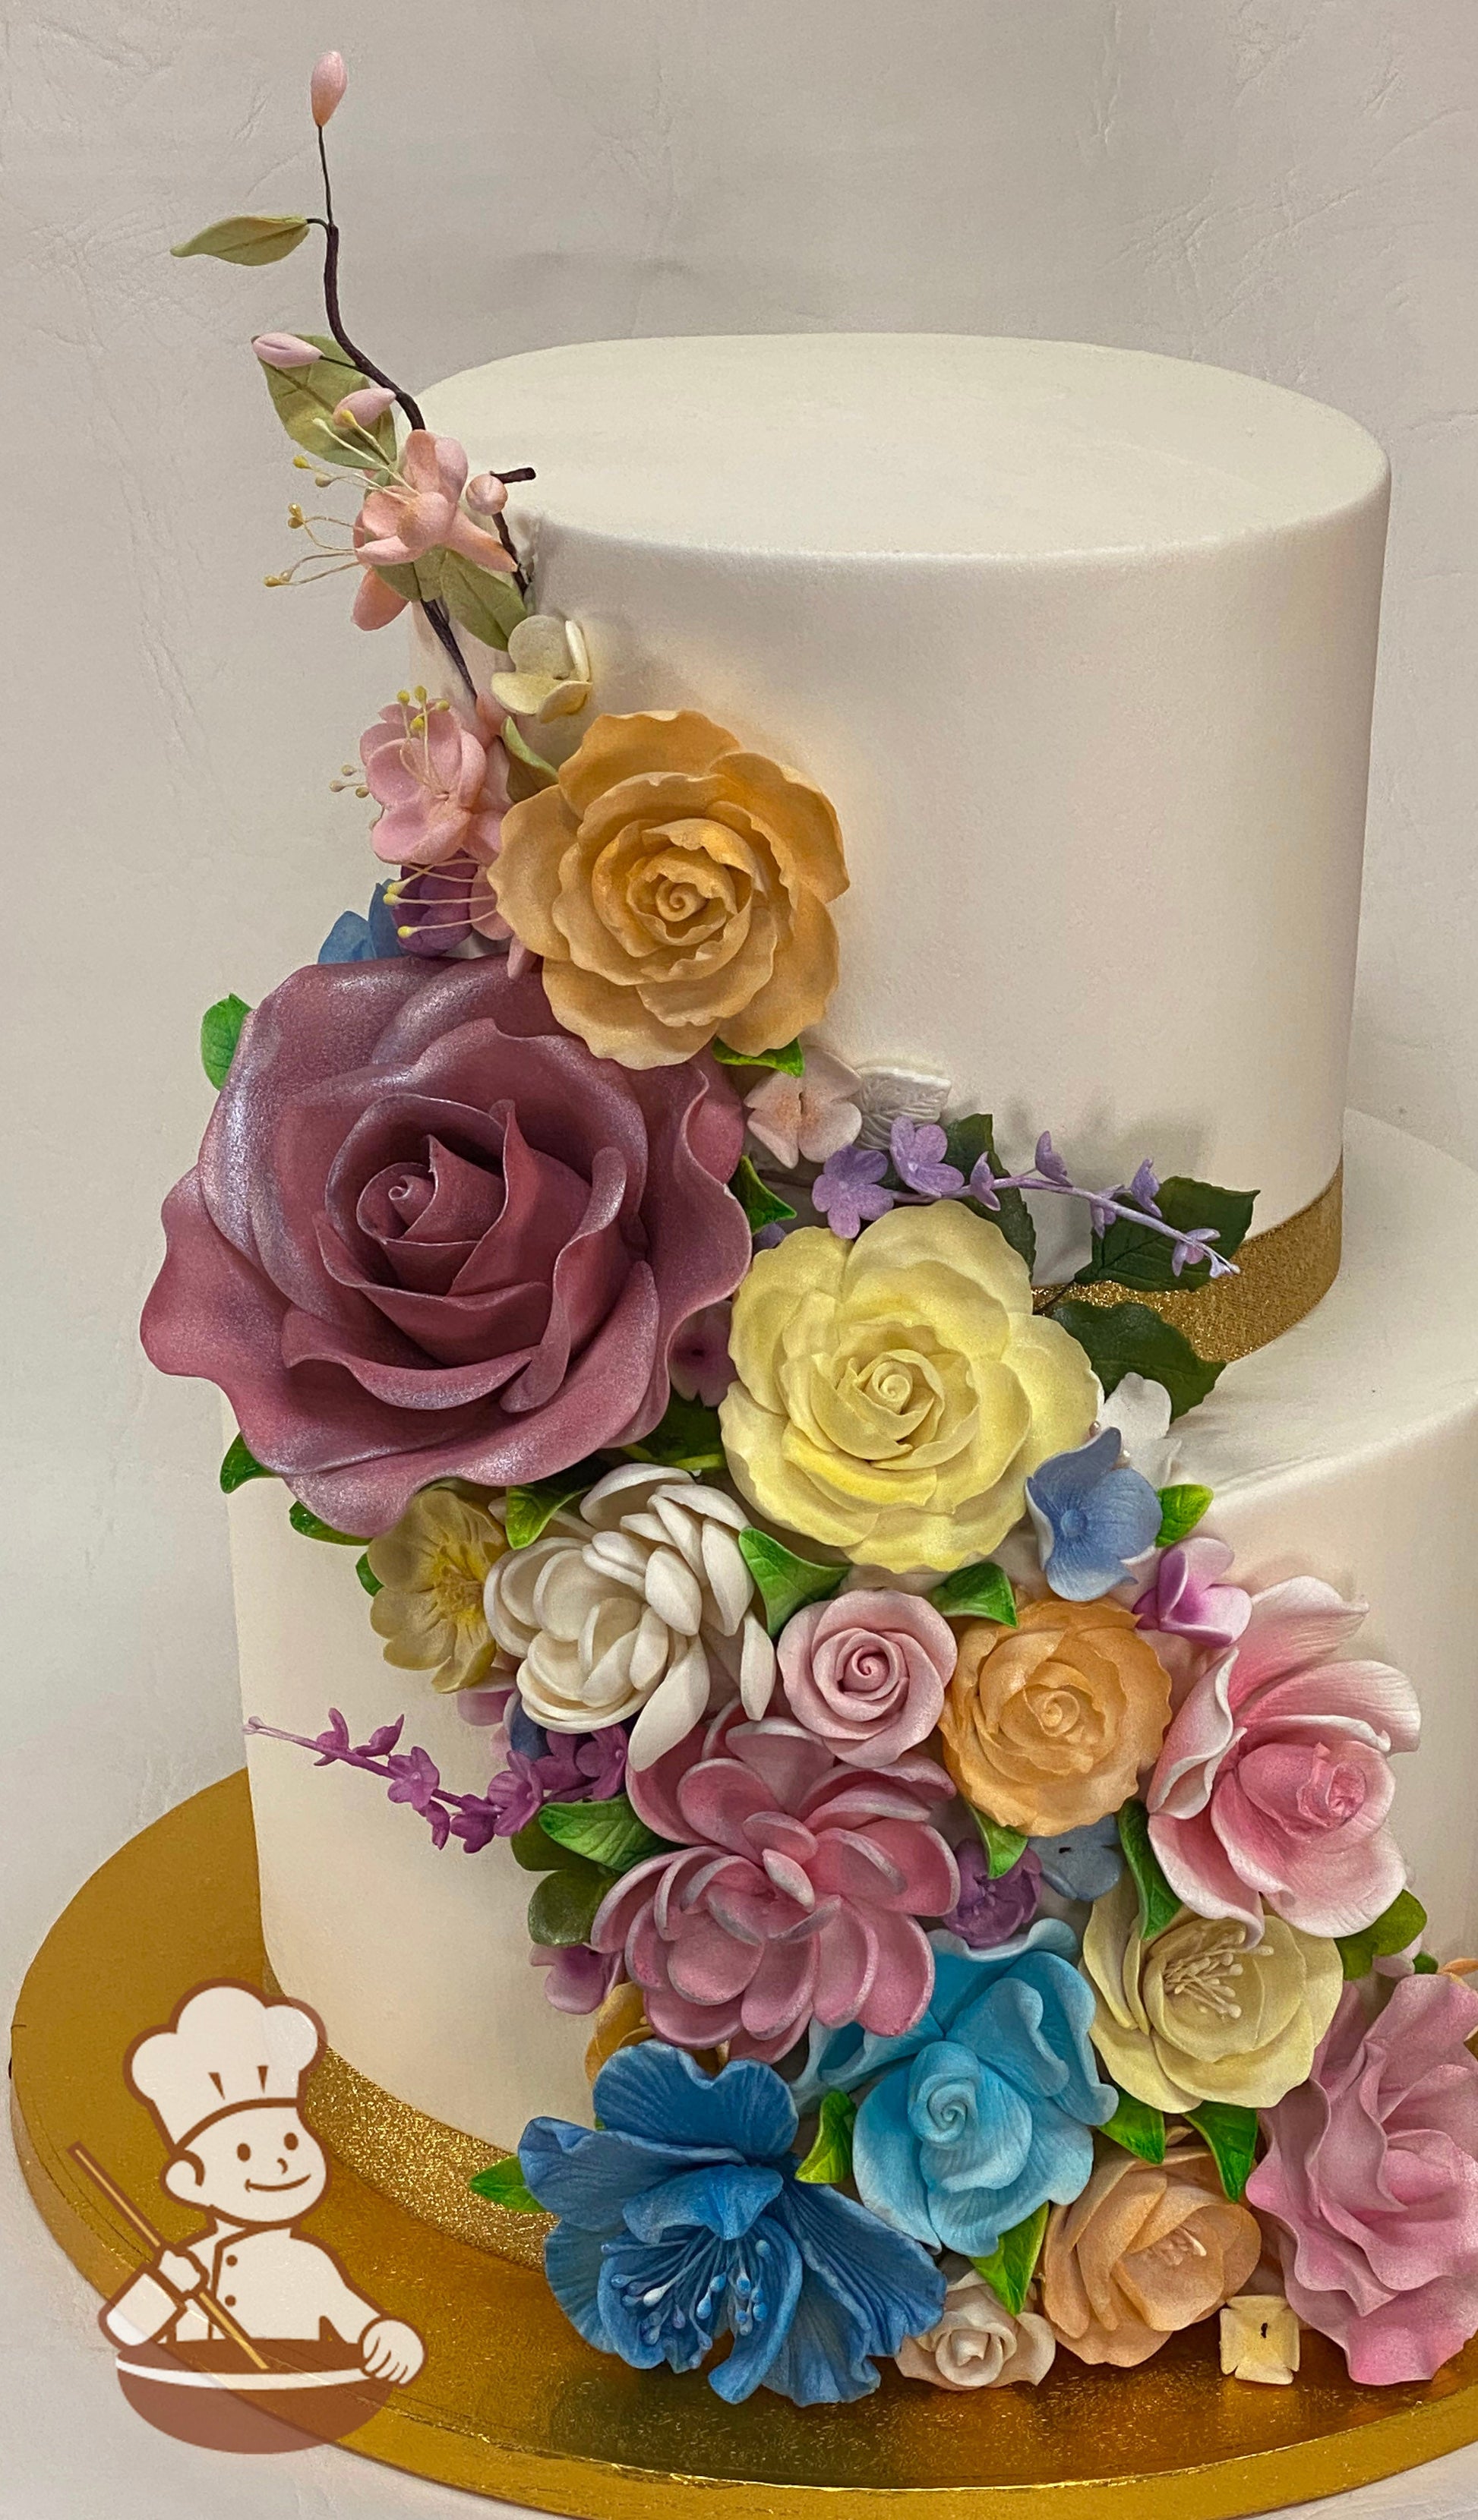 2-tier cake with smooth white icing and decorated with an assortment of colorful sugar flowers in pinks, oranges, yelllows and blues.